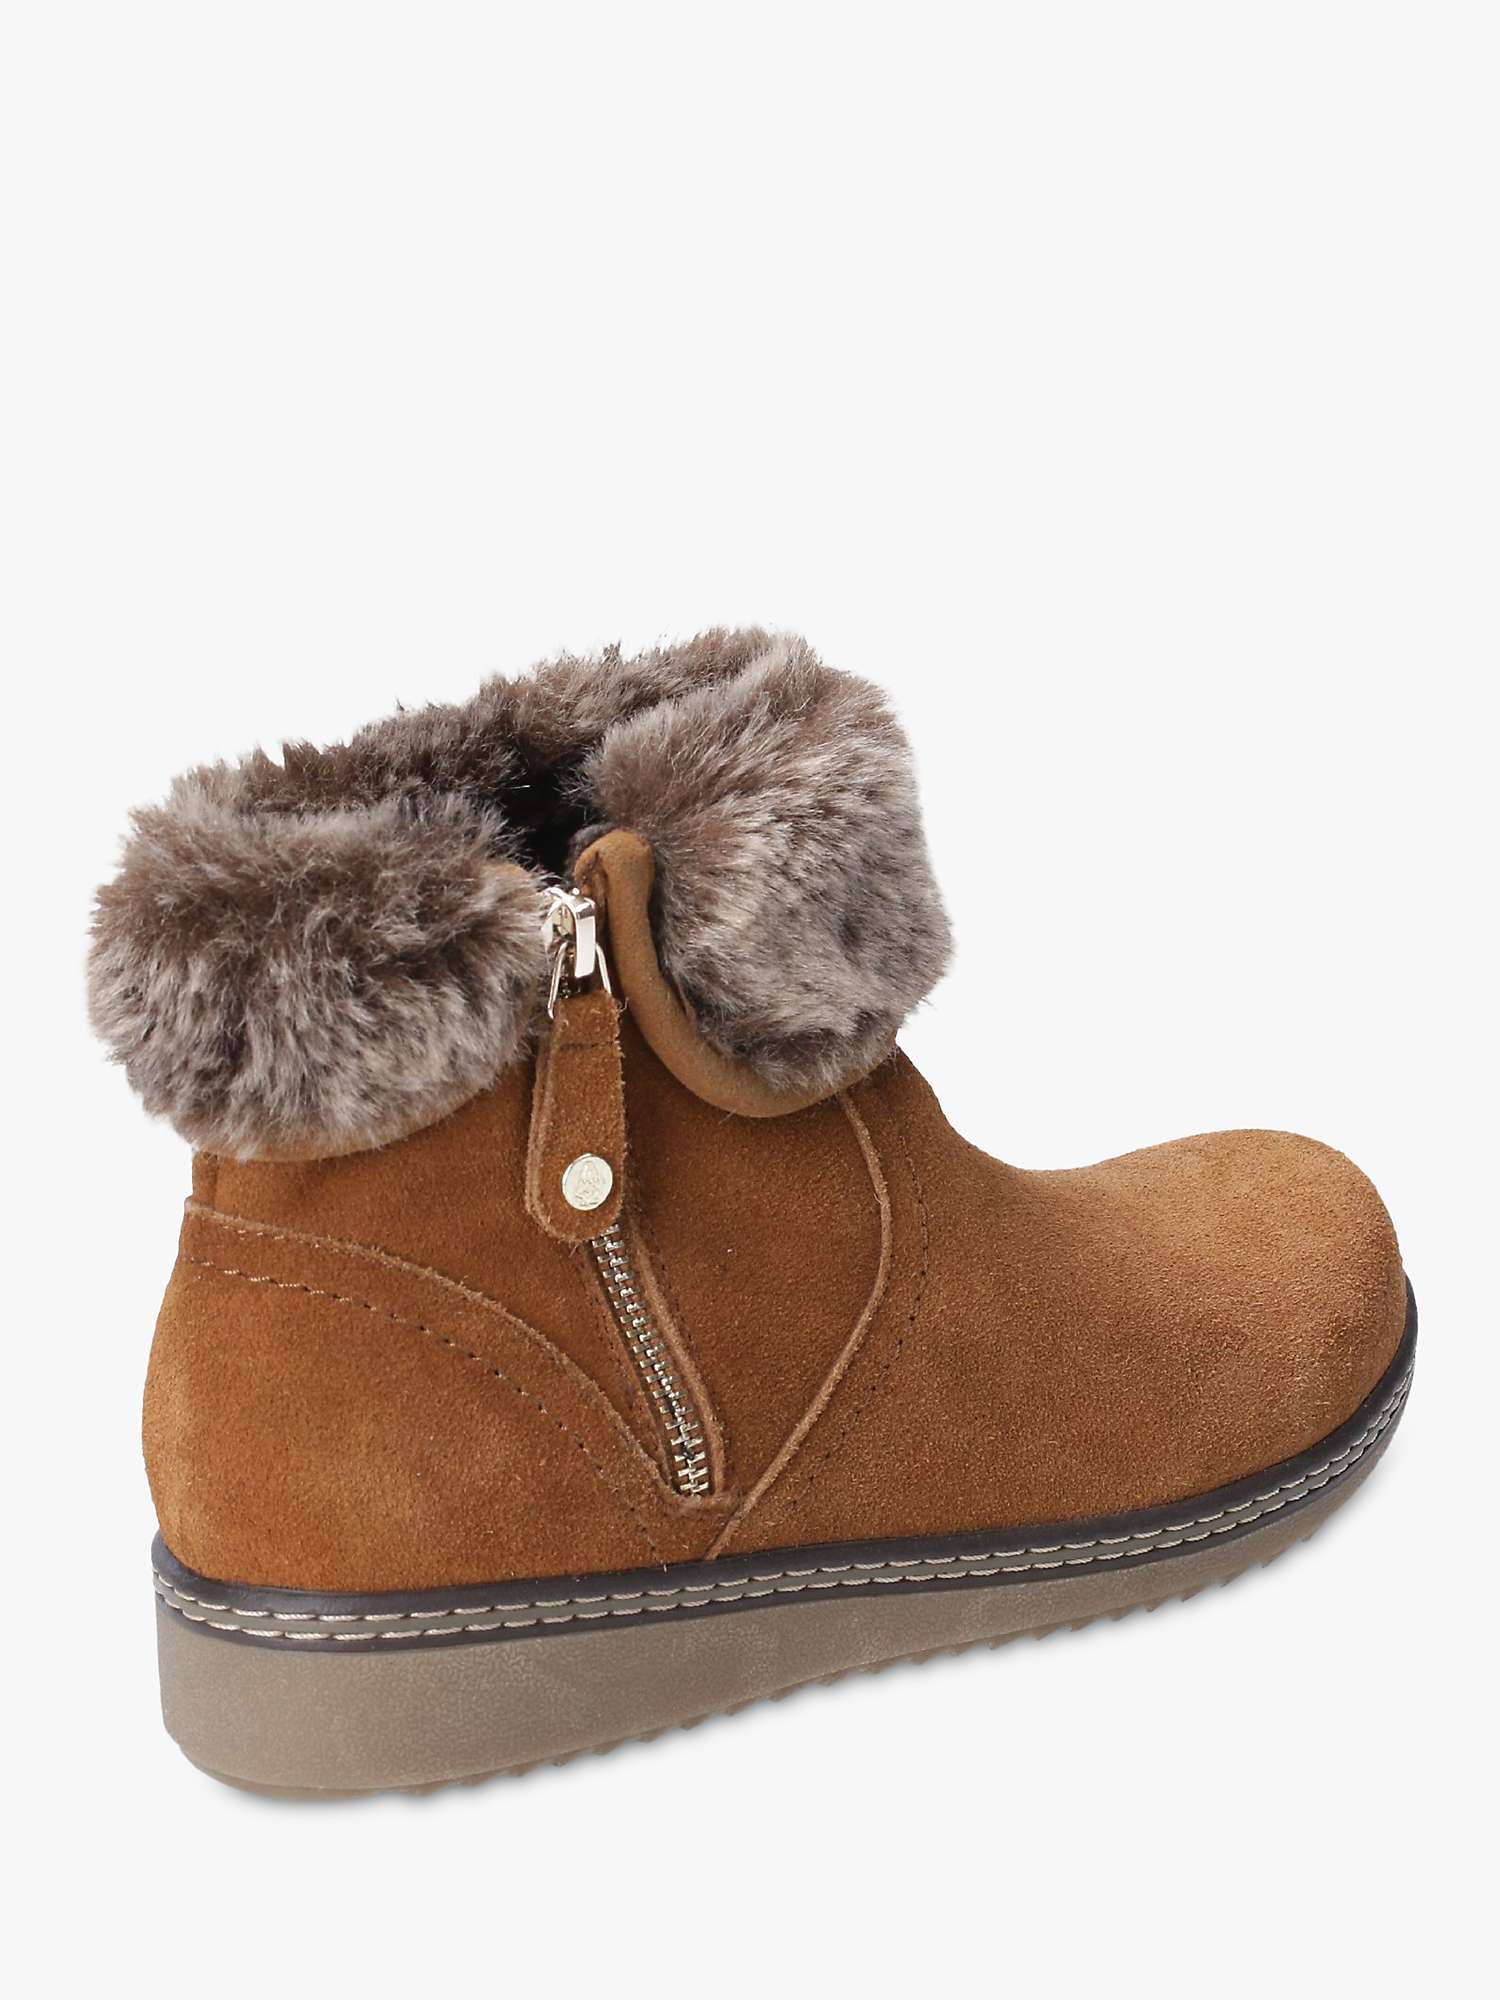 Buy Hush Puppies Penny Suede Faux Fur Wedge Heel Ankle Boots Online at johnlewis.com